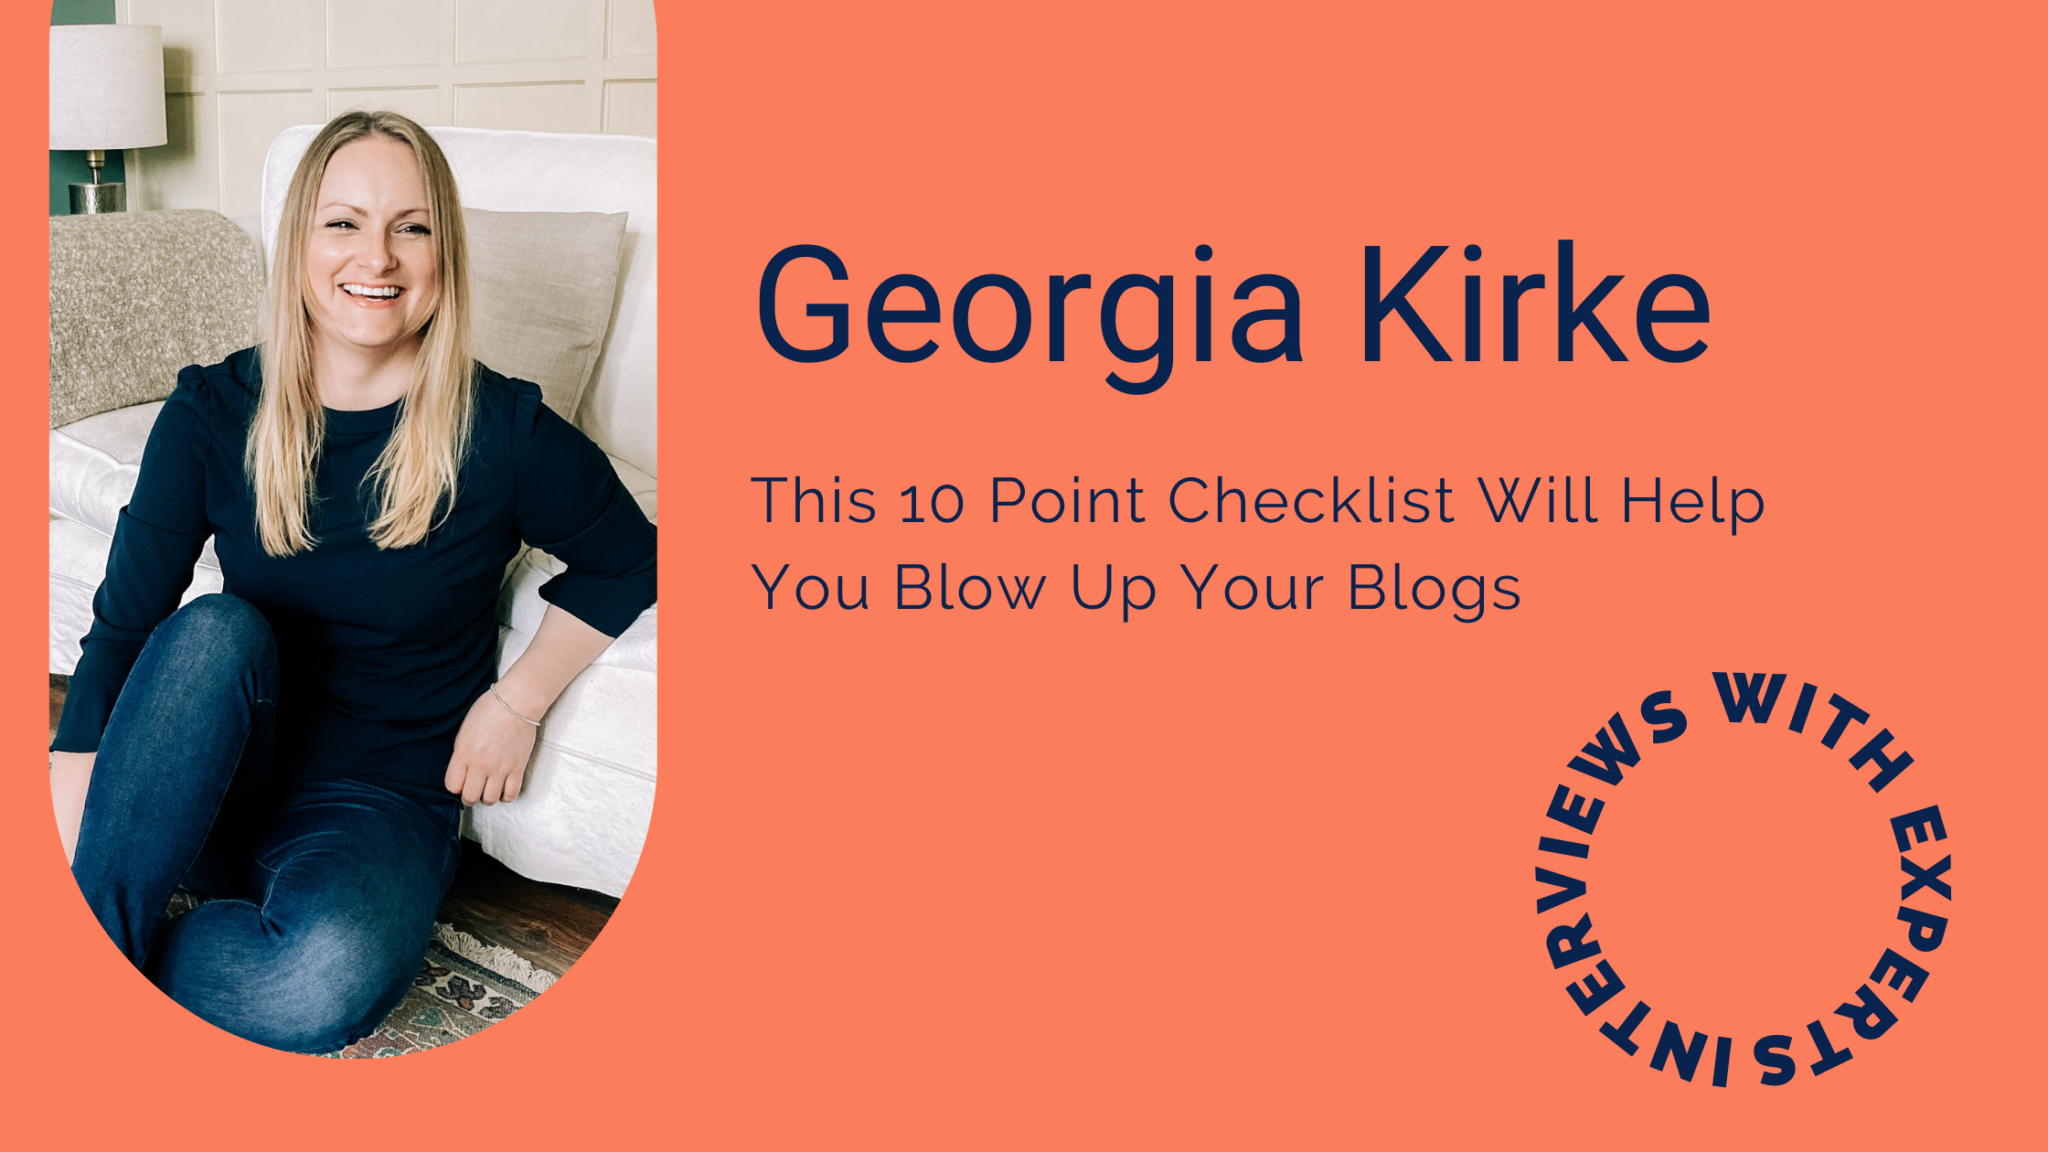 This 10 Point Checklist Will Help You Blow Up Your Blogs